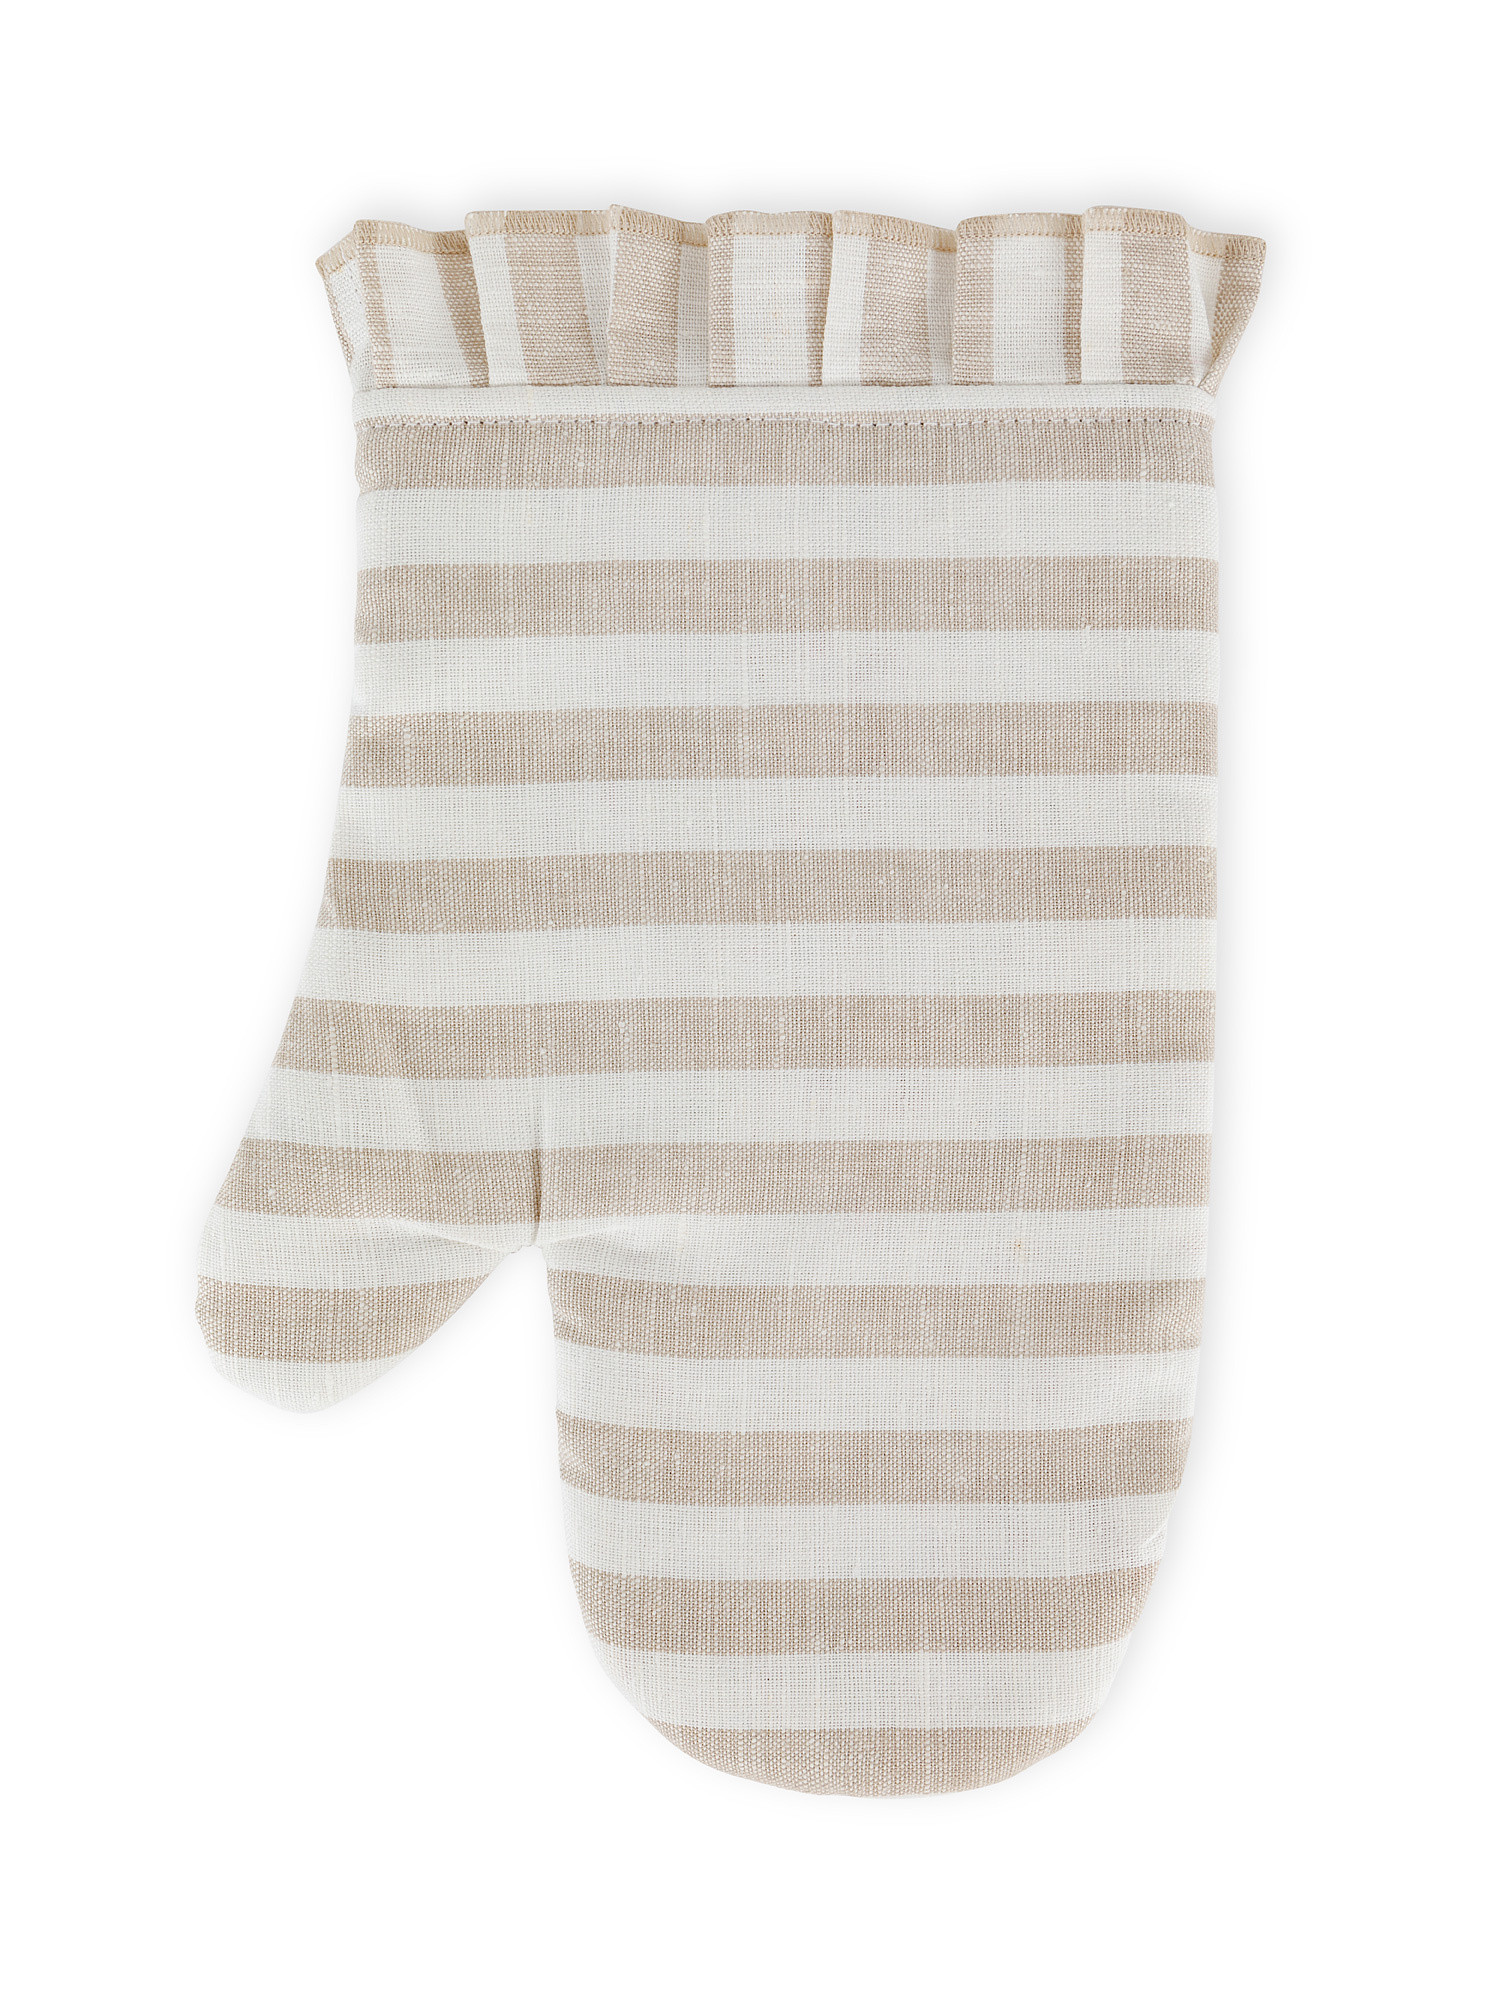 Linen and cotton striped kitchen mitt, Beige, large image number 0